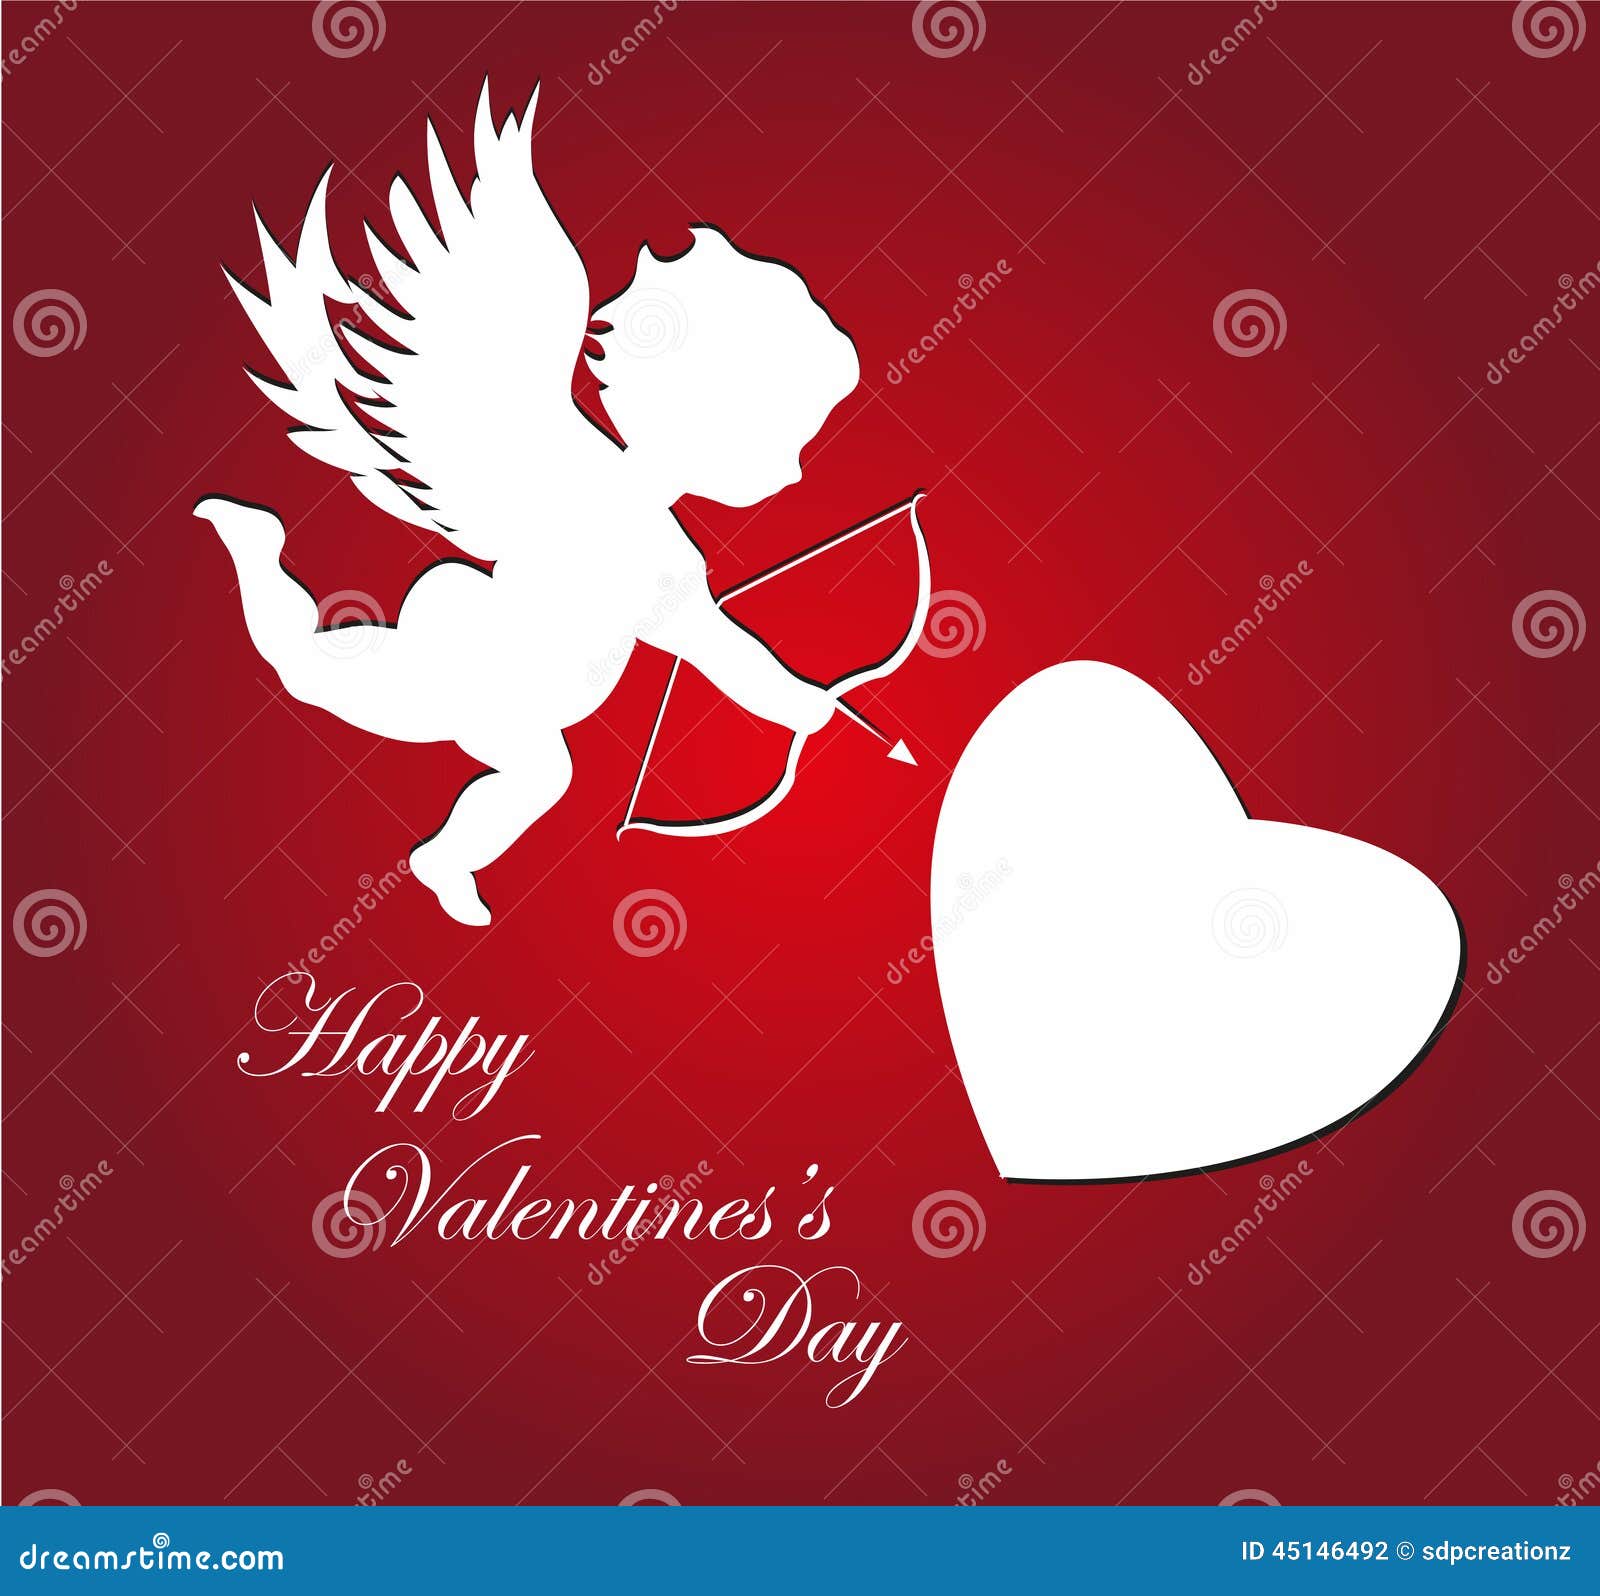 Cupid background stock vector. Illustration of cupid - 45146492